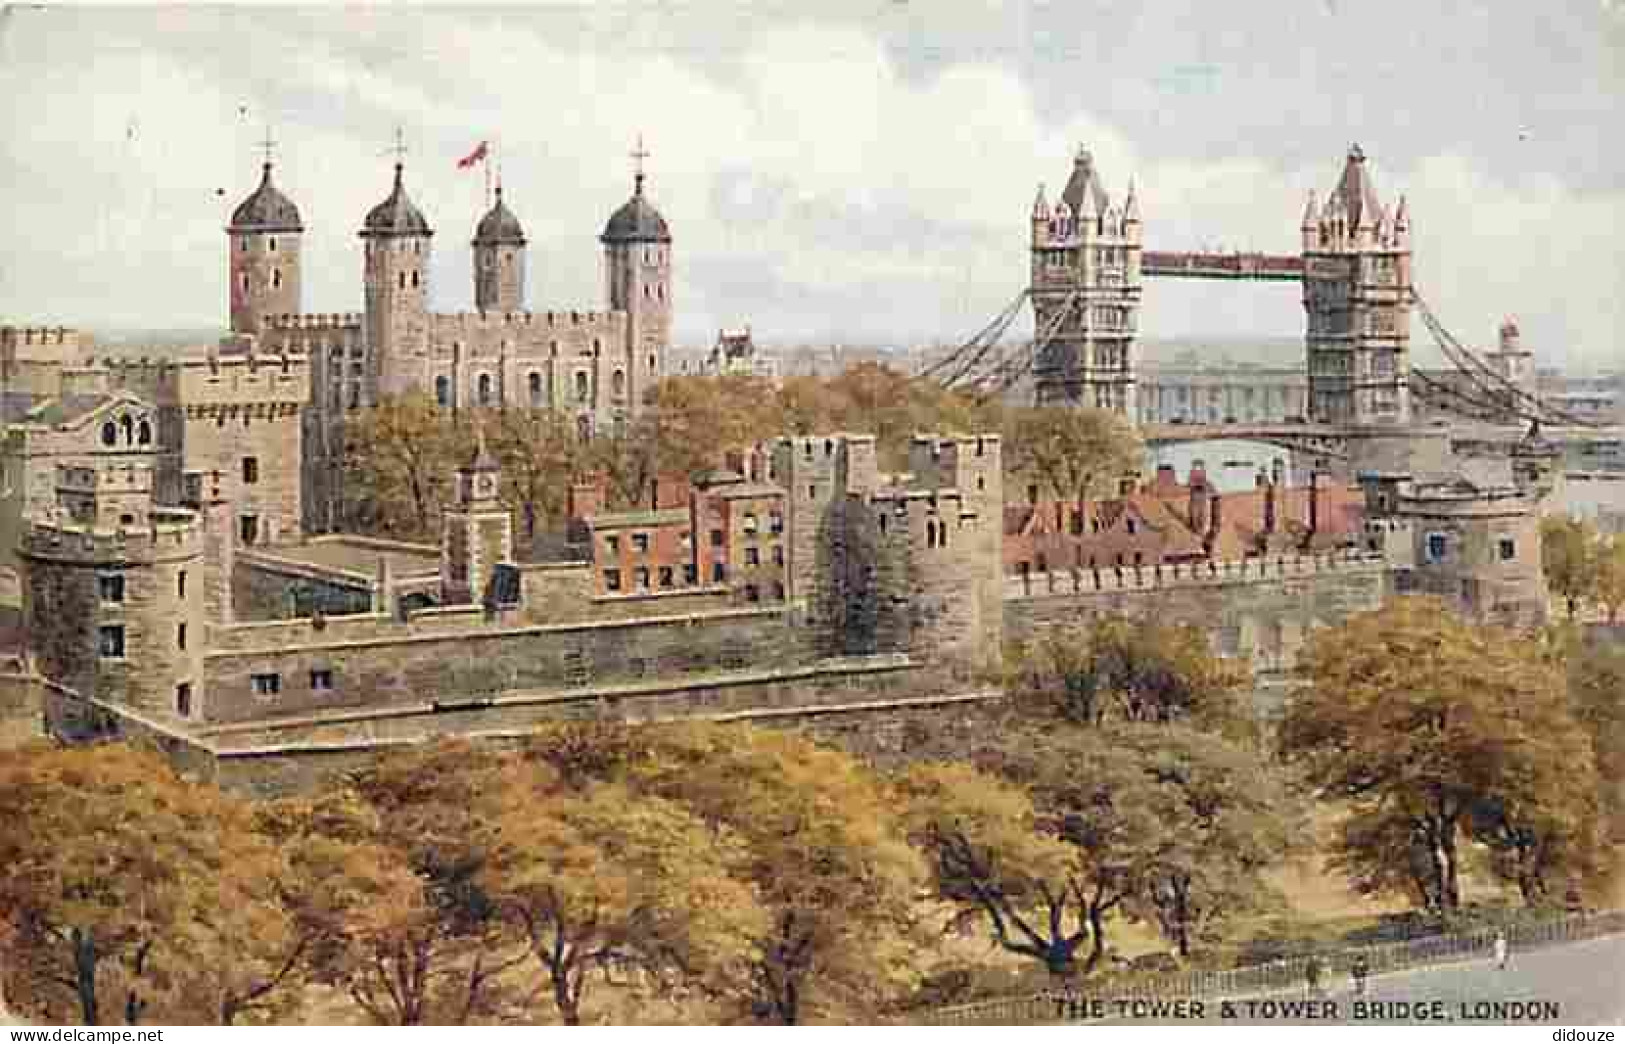 Angleterre - Londres - London - The Tower And Tower Bridge - Colorisée - CPA - Voir Scans Recto-Verso - Tower Of London